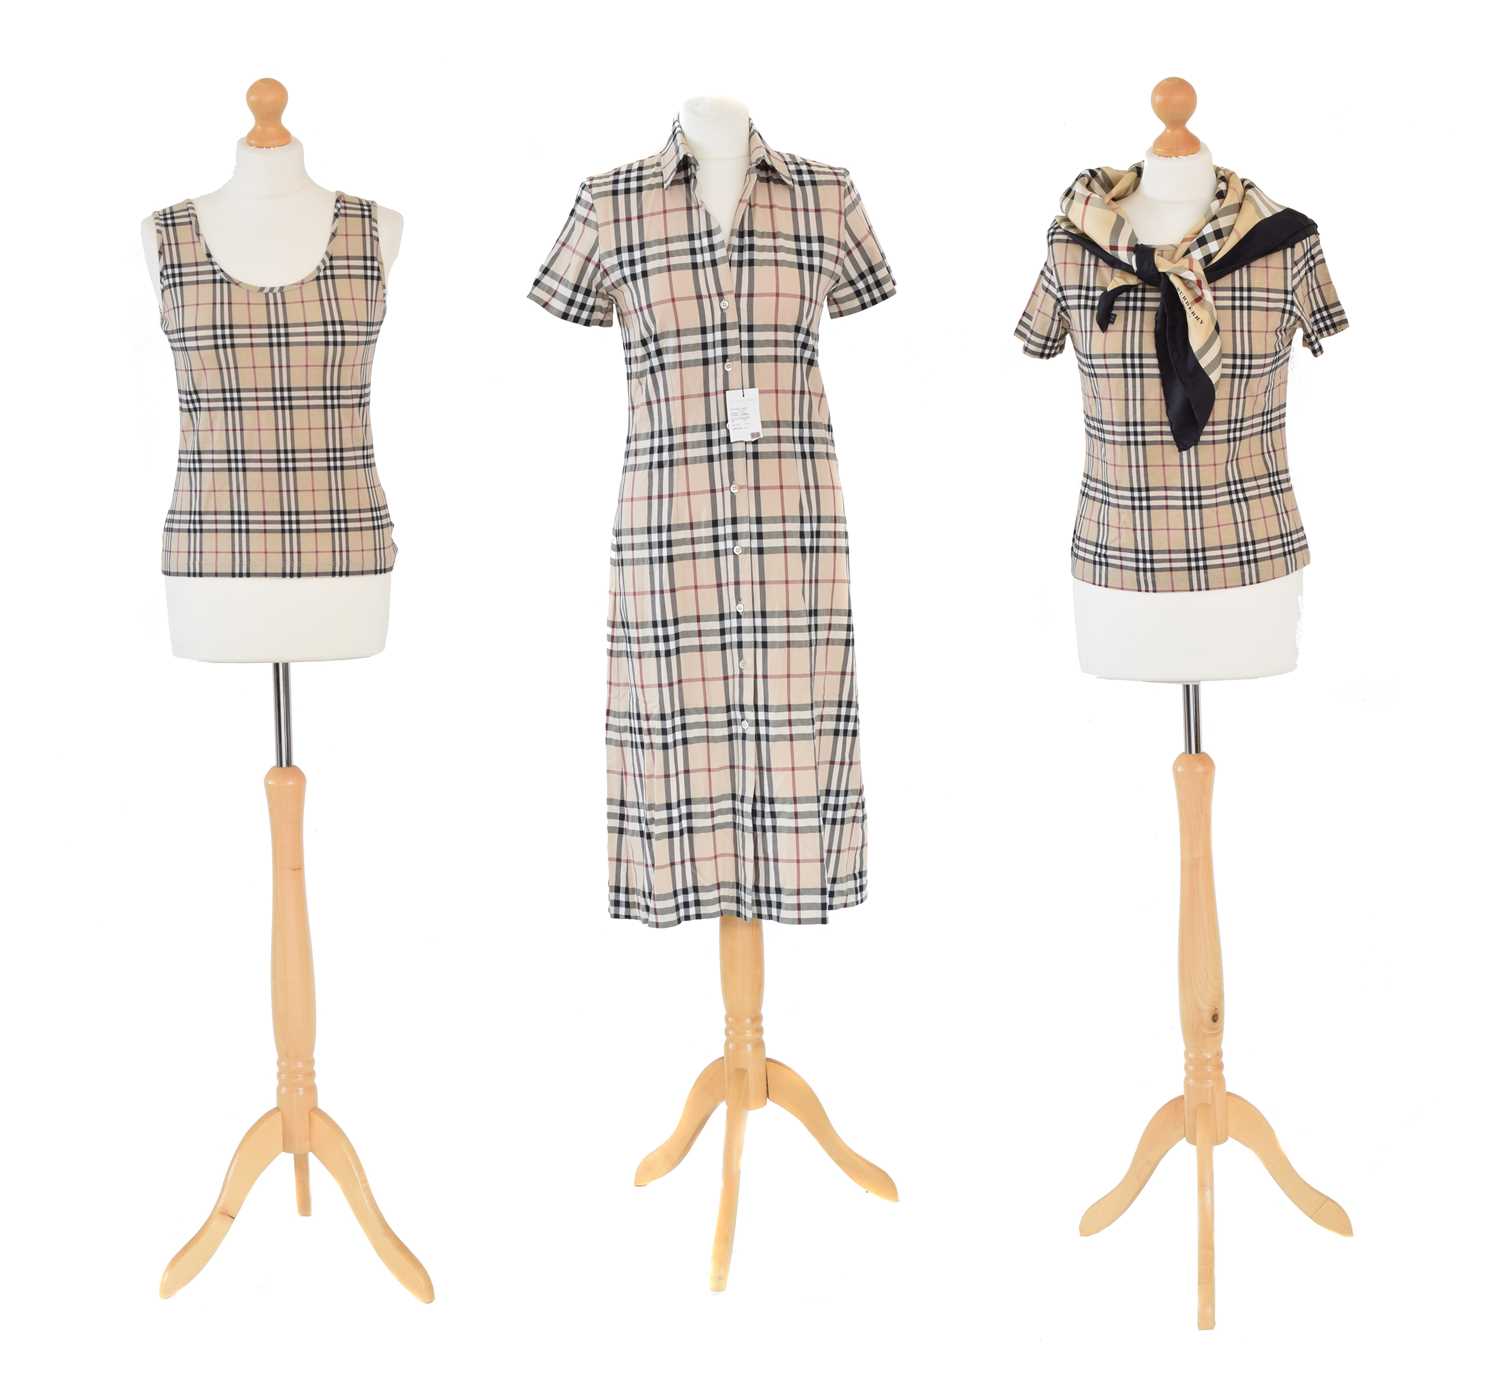 Lot A selection of Burberry clothing